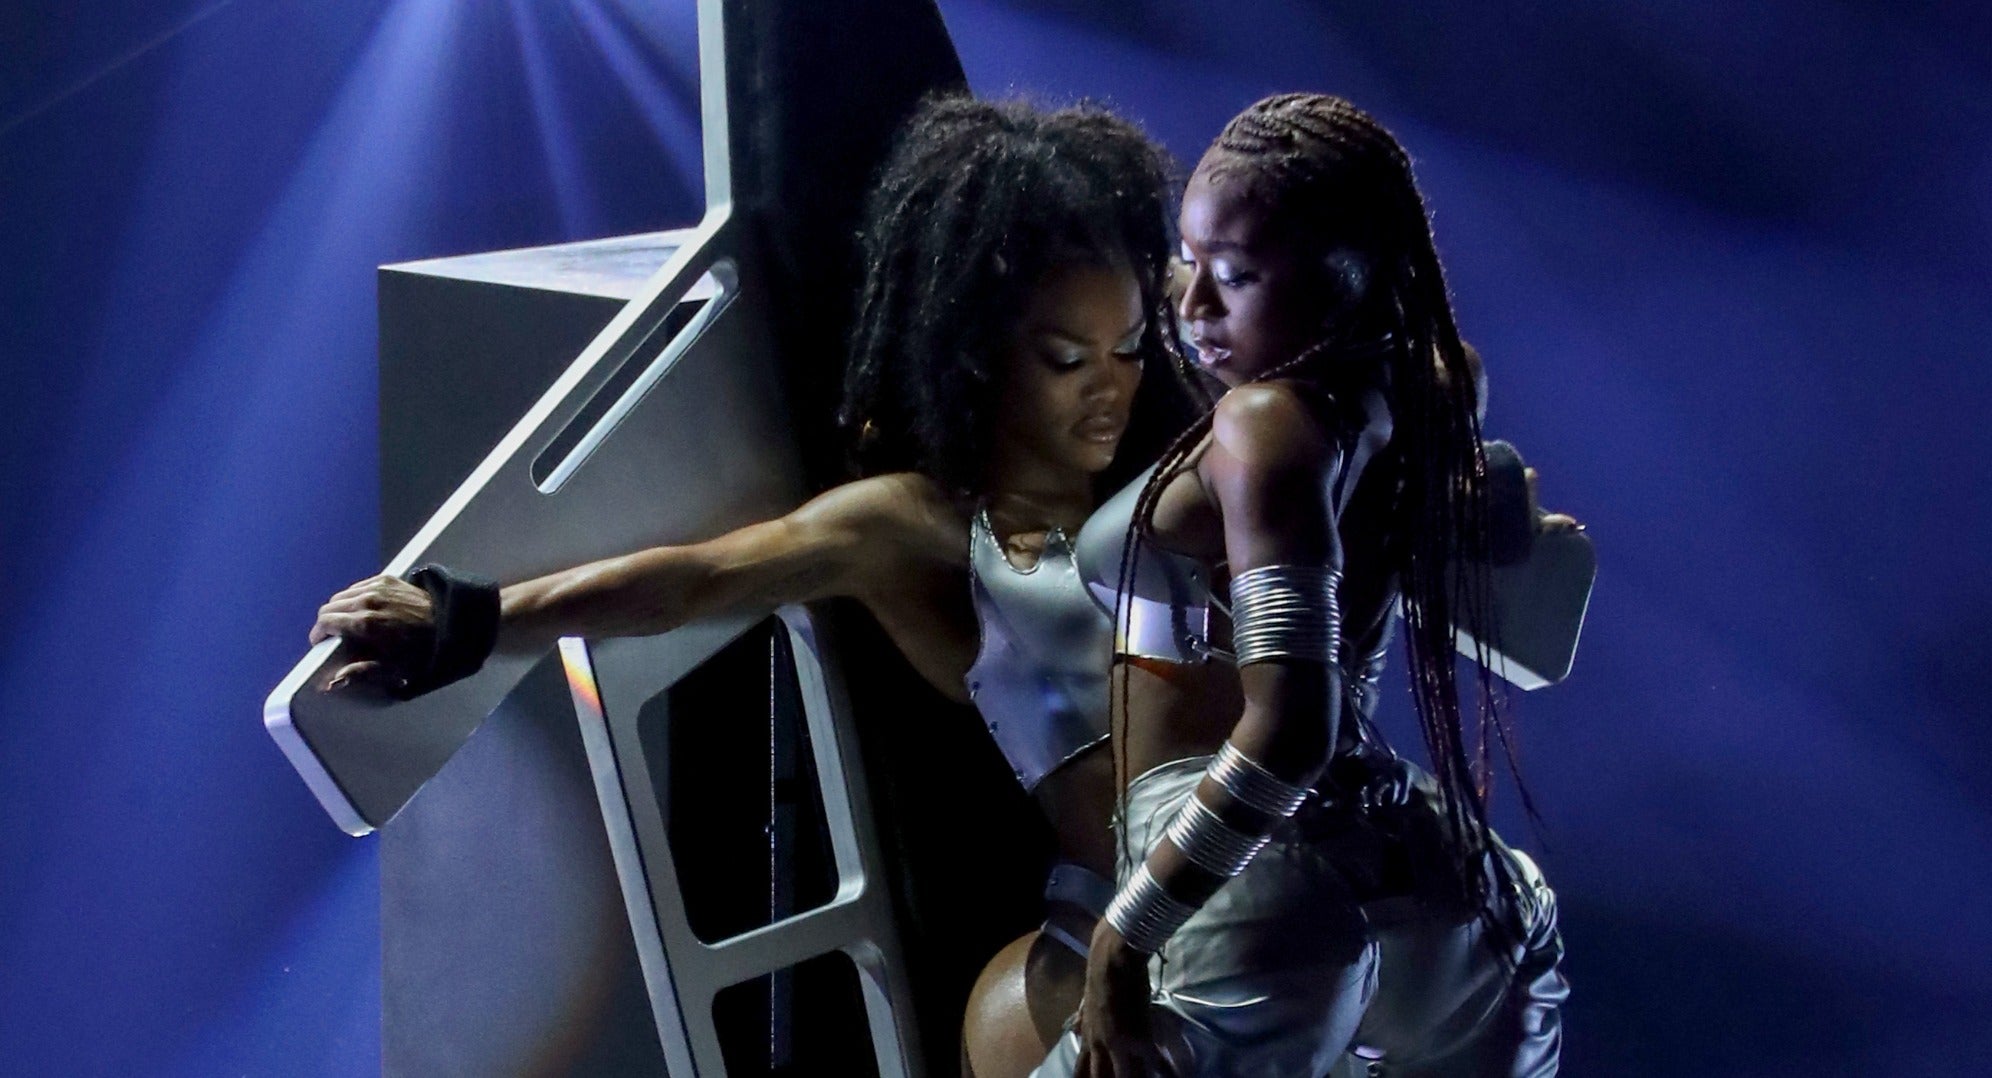 Normani pays tribute to Janet Jackson in steamy VMAs performance